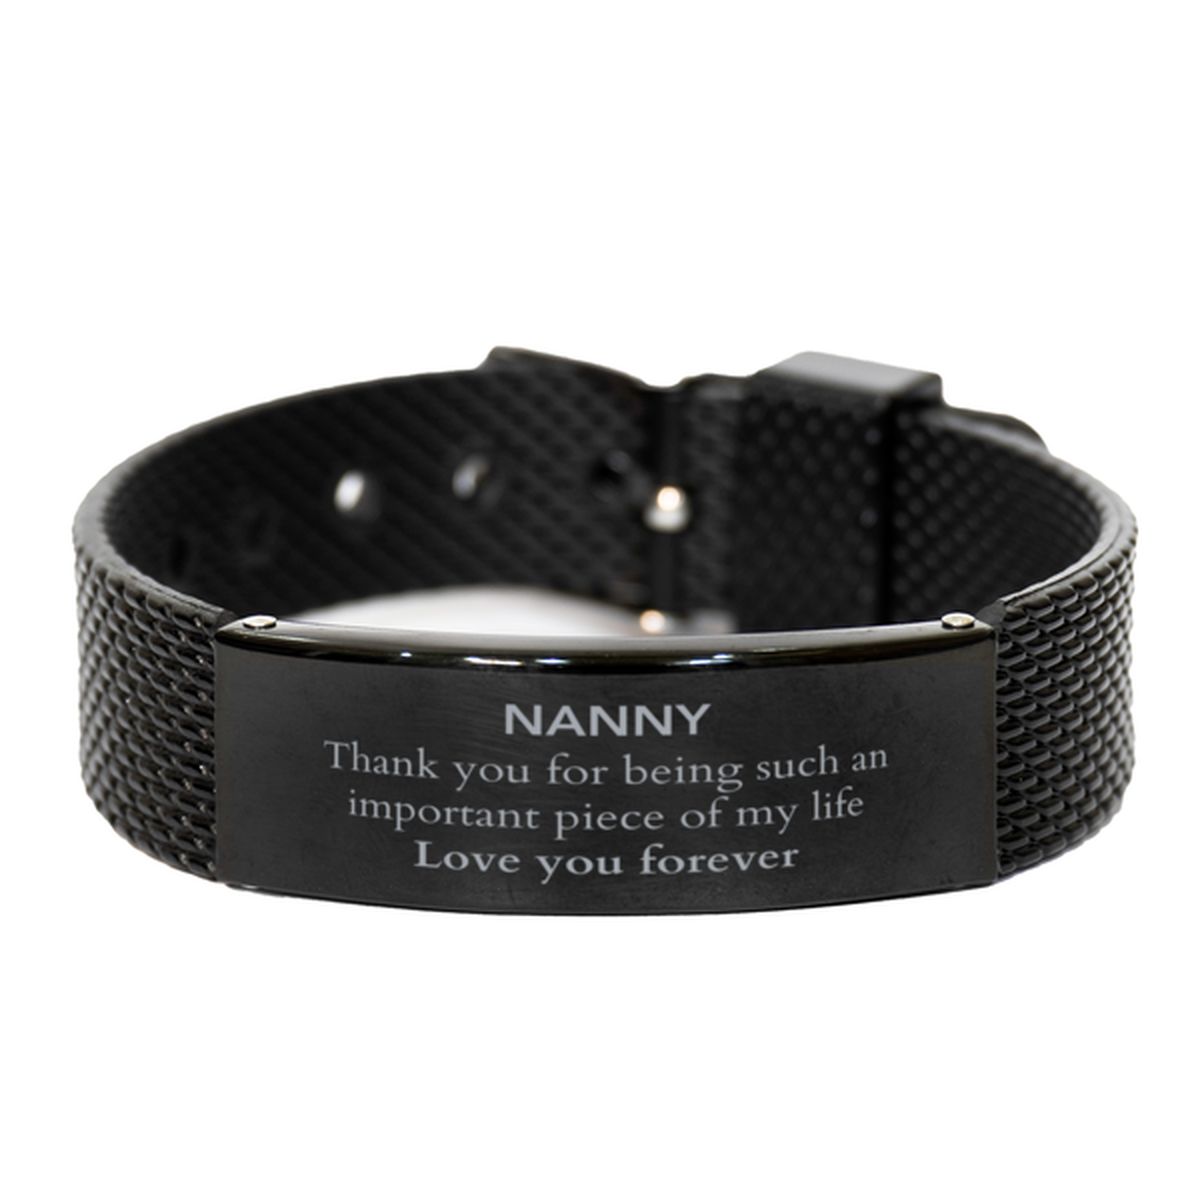 Appropriate Nanny Black Shark Mesh Bracelet Epic Birthday Gifts for Nanny Thank you for being such an important piece of my life Nanny Christmas Mothers Fathers Day